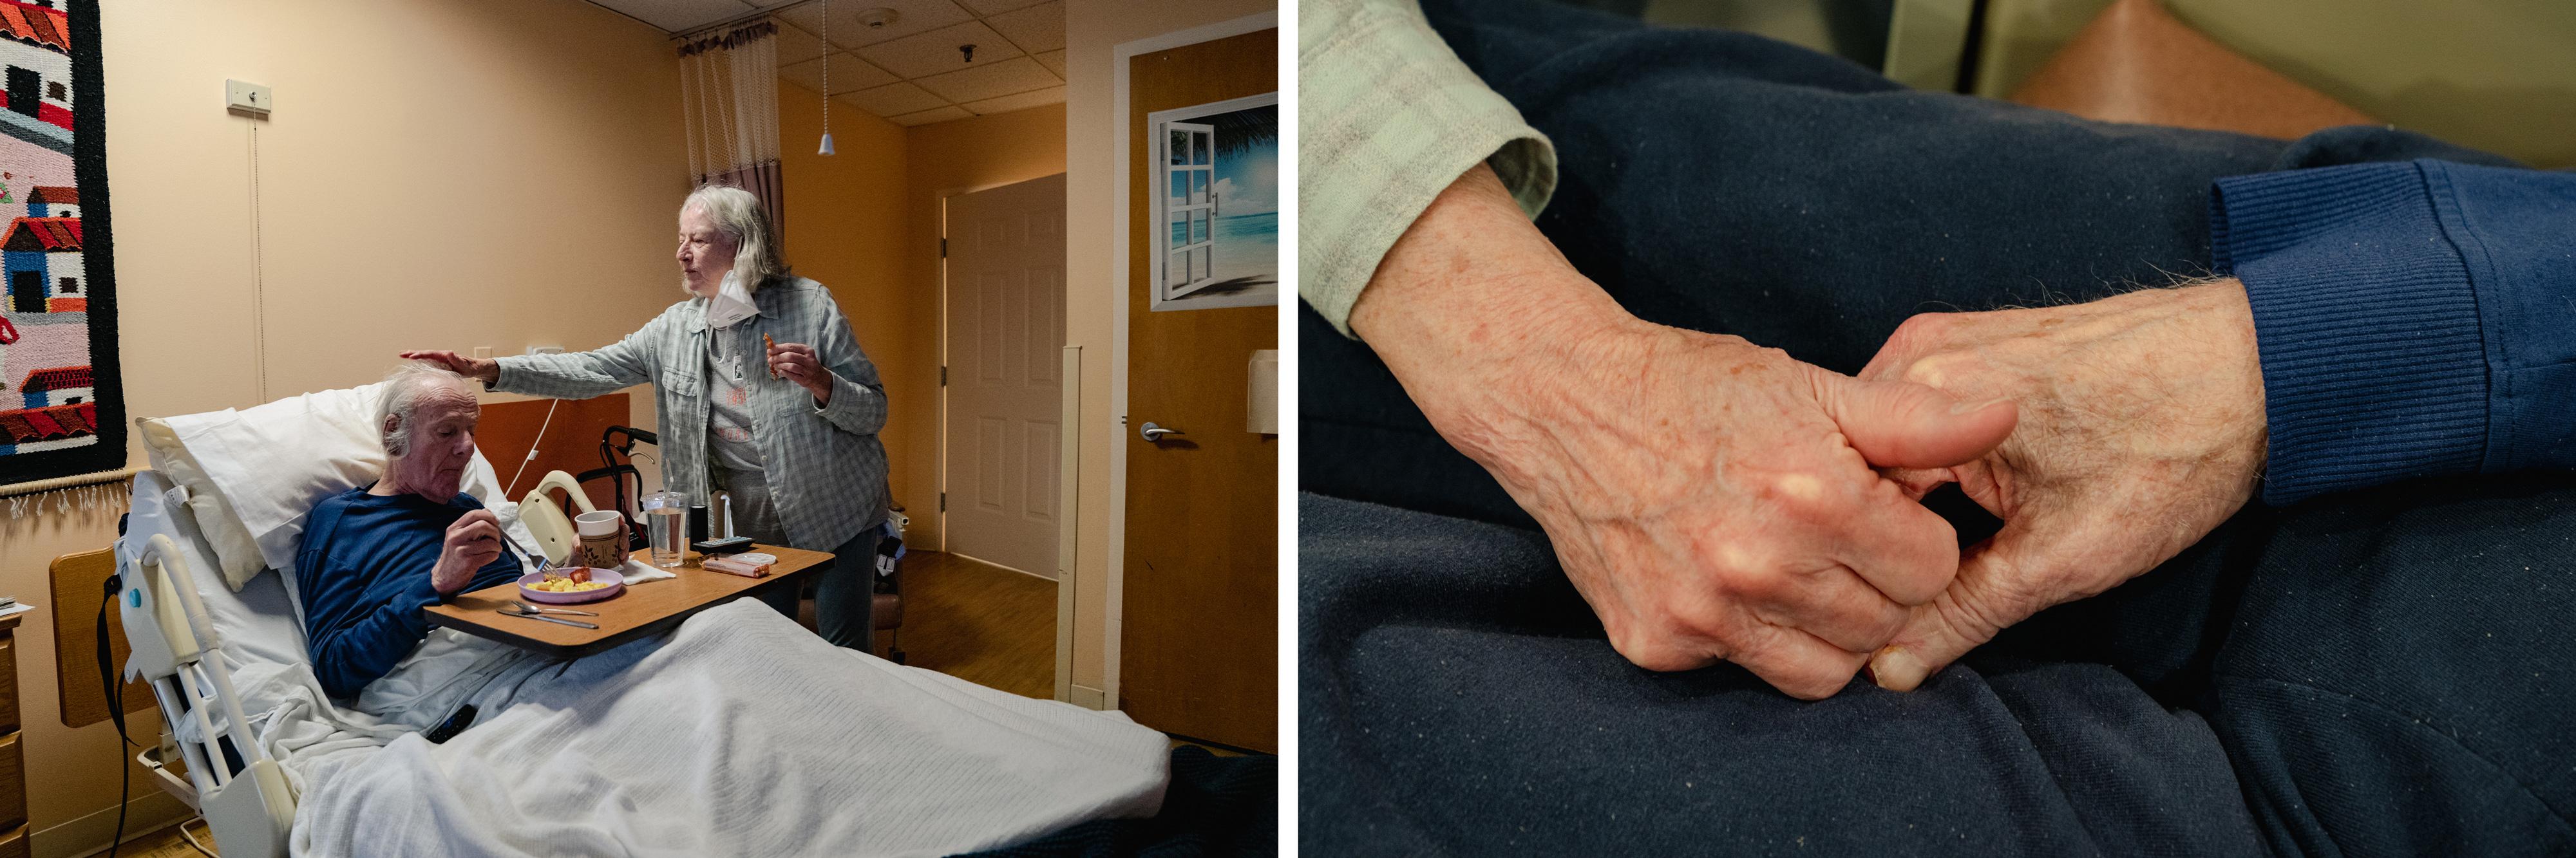 Two photos shown side-by-side: a woman caring for her elderly husband while in bed at a nursing home; a close-up photo of the two holding hands.